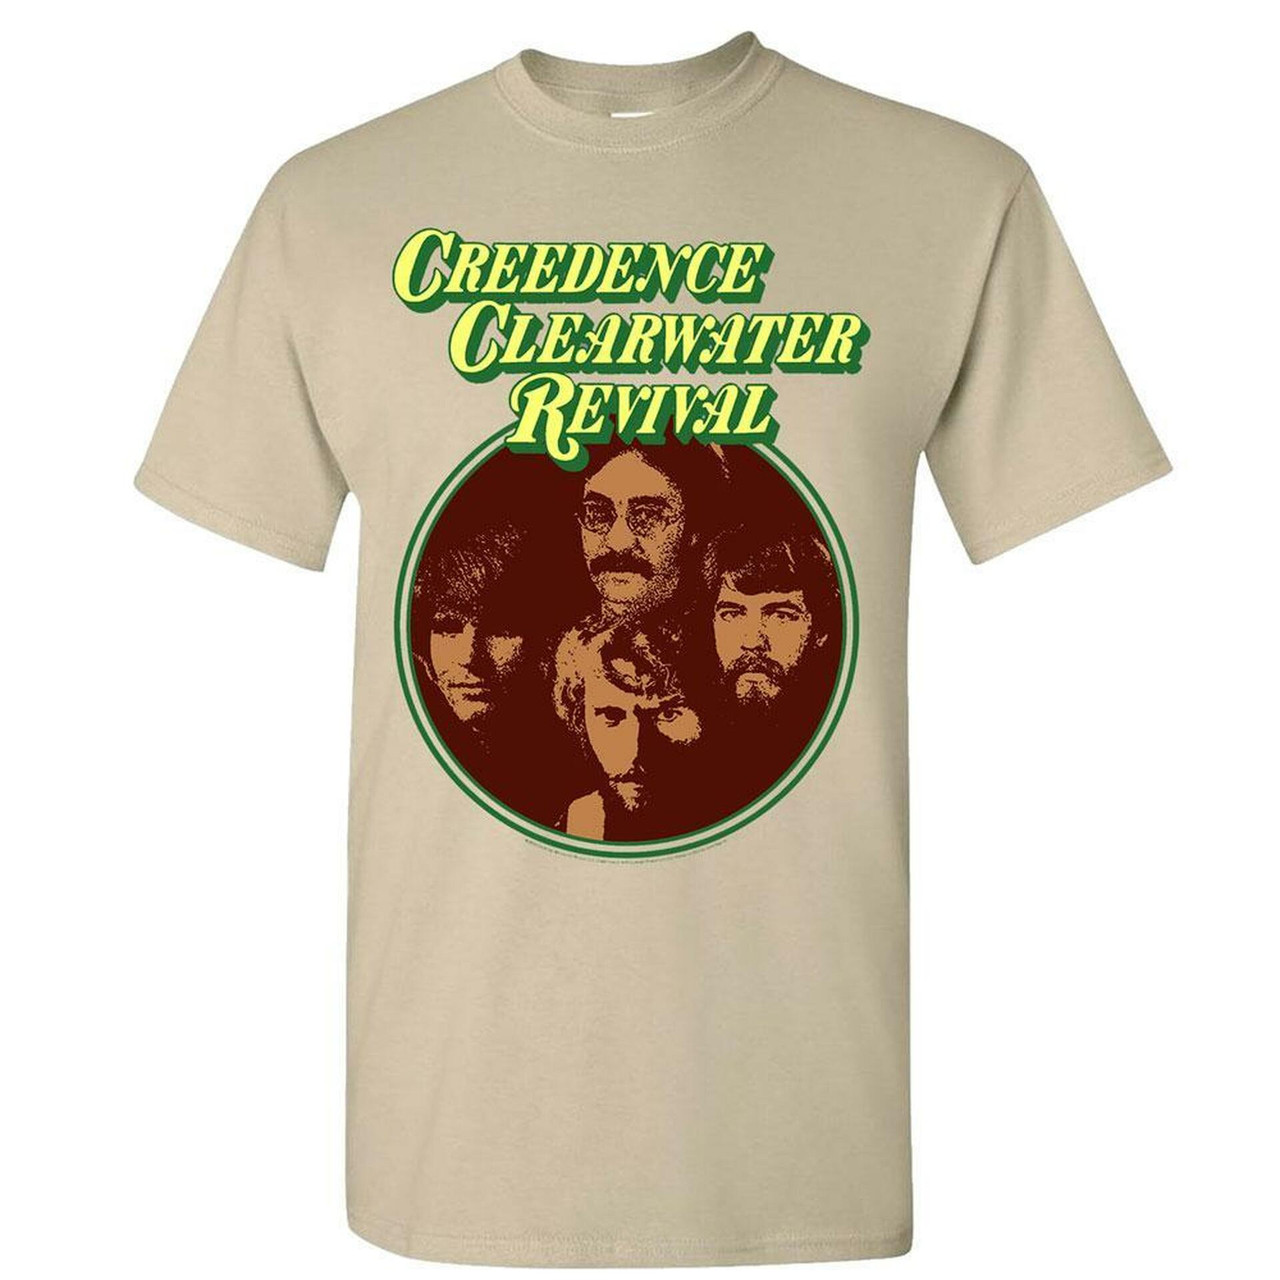 Creedence Clearwater Revival Legendary T-Shirt - Zone Rock